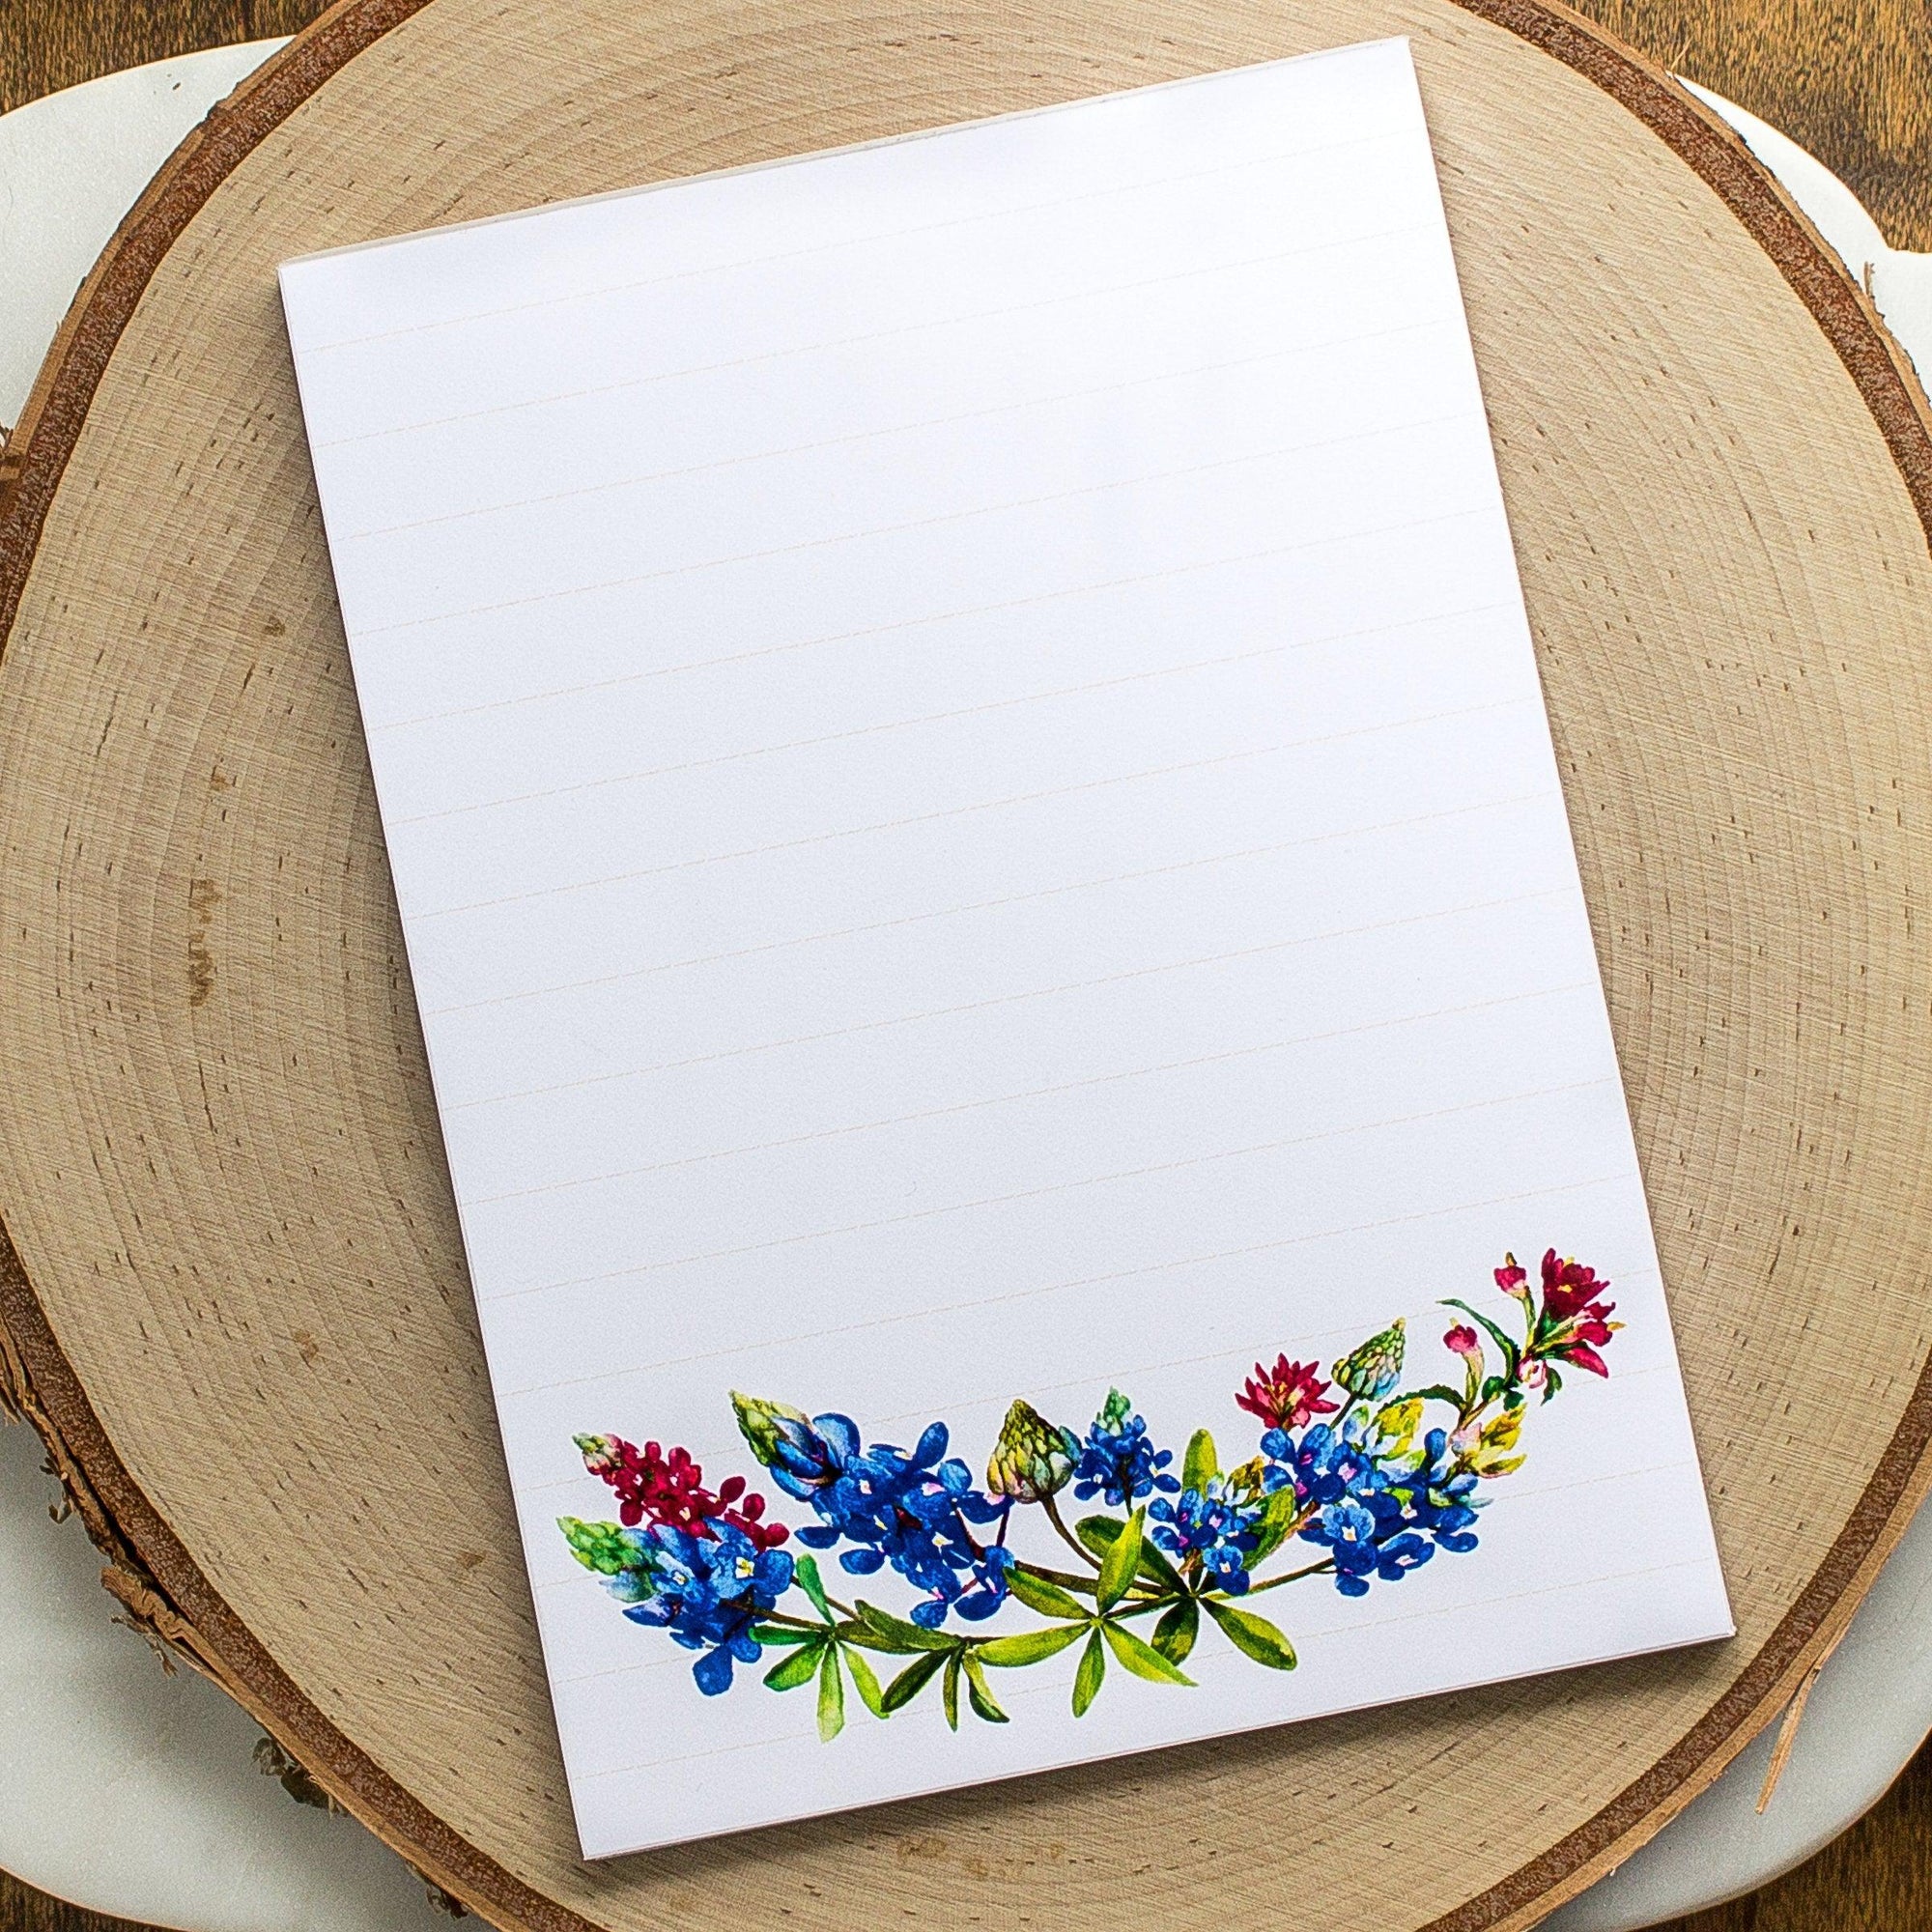 Personalized Texas wildflowers Notepad - Watercolor To Do List - Texas Bluebonnets Note Pad - Custom Lined Note Pad - Gift for Gardeners